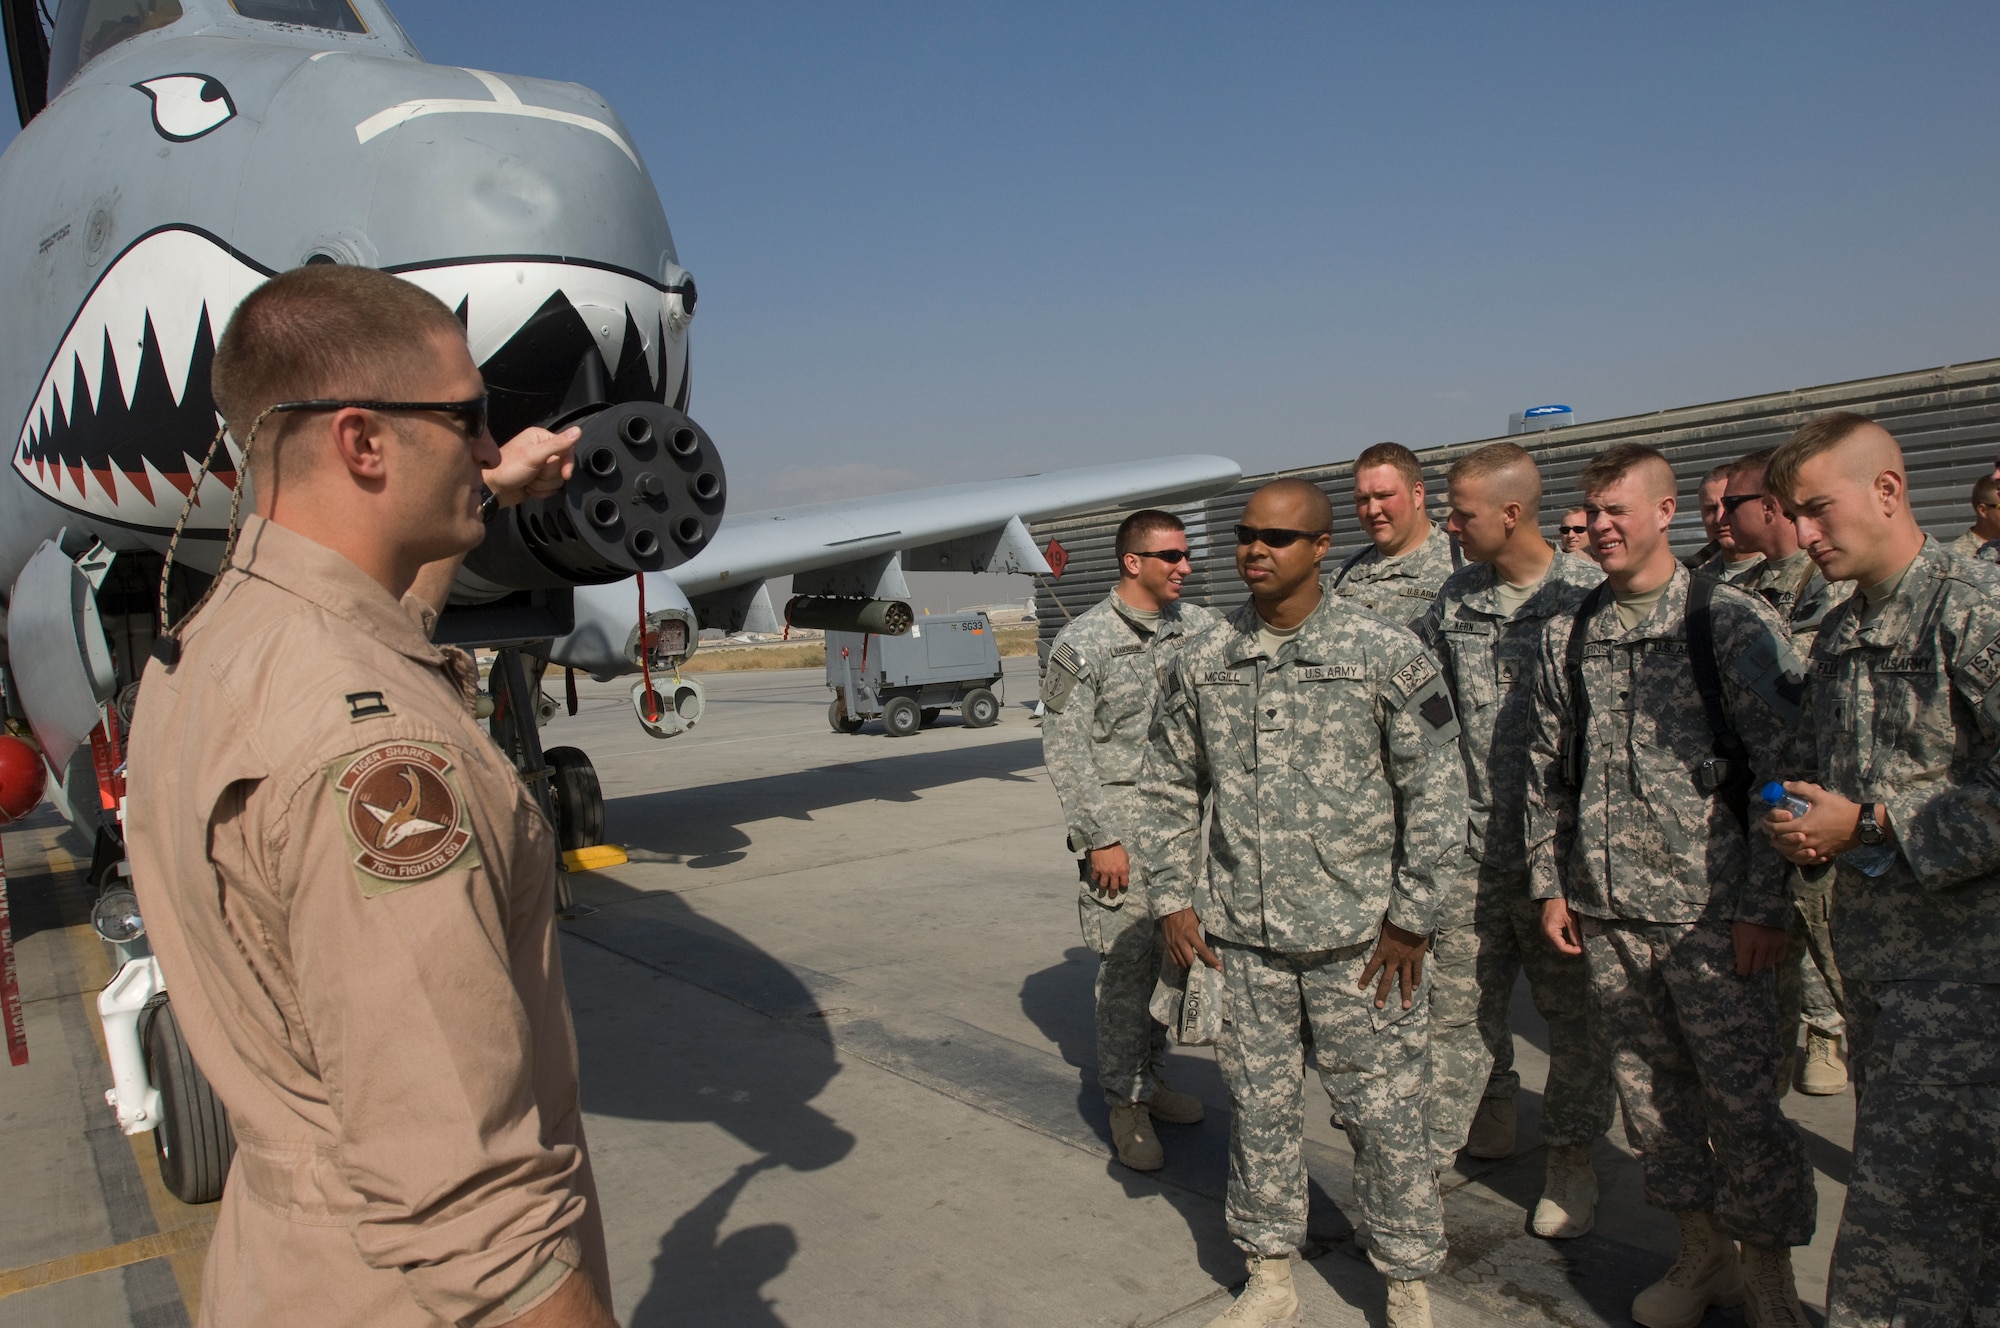 BAGRAM AIR FIELD, Afghanistan -- Capt. Dylan Thorpe, an A-10 Thunderbolt II pilot, talks about the 30MM cannon on the A-10 with Pennsylvania Army National Guard Soldiers during a recent visit to Bagram's fighter squadrons. Members from the F-15E 391st Expeditionary Fighter Squadron and A-10 75th Expeditionary Fighter Squadron hosted the visit after the Soldiers had expressed a desire to personally thank pilots who fly close-air support missions to support troops on the ground engaged in fire-fights with enemy forces. The A-10's 30mm weapon is a vital asset to Solders on front lines who need close-air support. (U.S. Air Force photo/Master Sgt. Keith Brown)